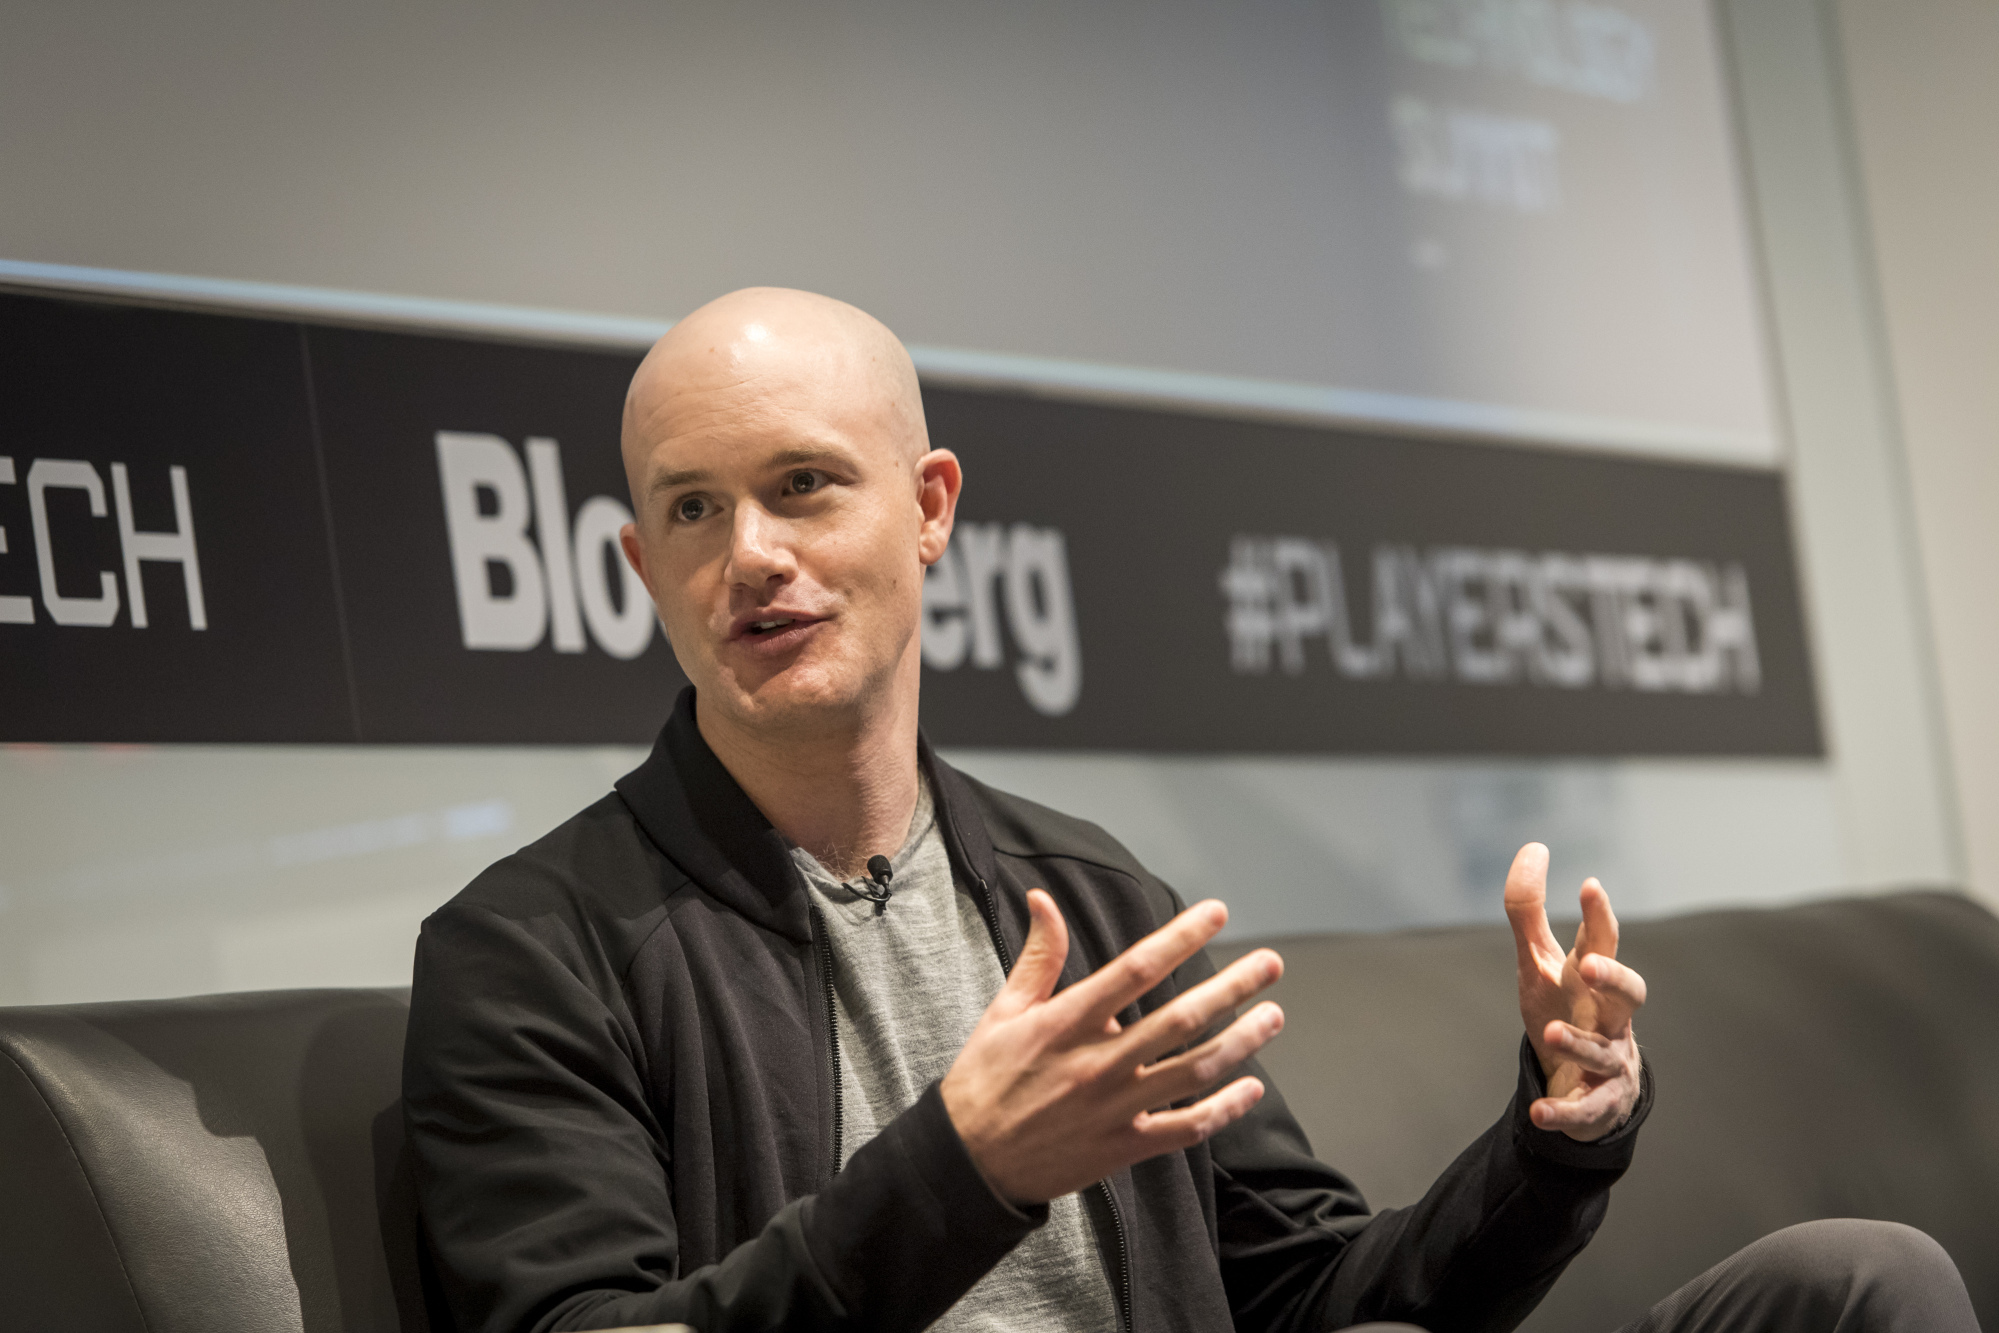 Key Speakers At The Bloomberg Players Technology Summit 